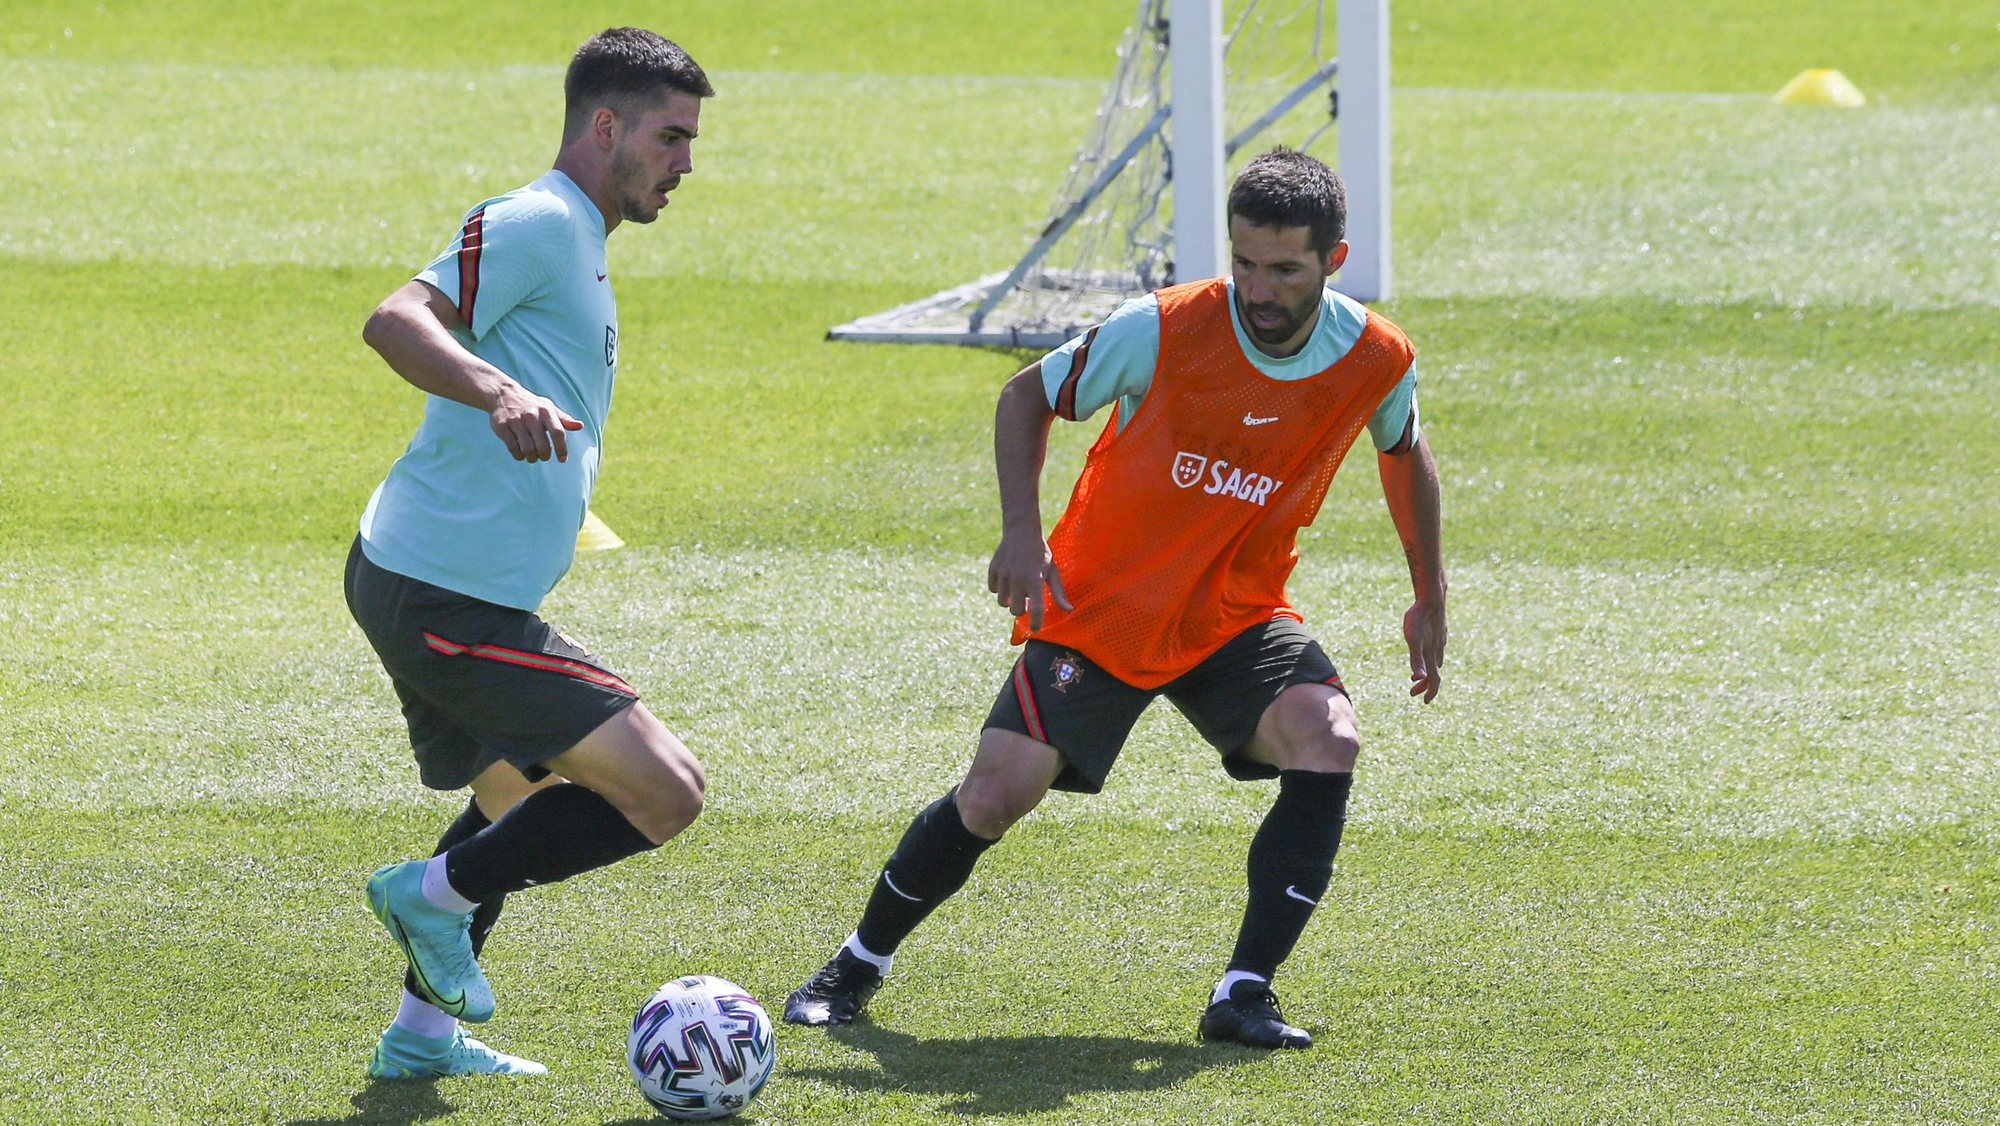 Portugal players André Silva (L) and João Moutinho during  todays trainning session 10 june 2021 in outskirst of Lisbon  in view   for the upcoming UEFA EURO 2020 Group F soccer match against Hungary in Budapest June11. MANUEL DE ALMEIDA/LUSA